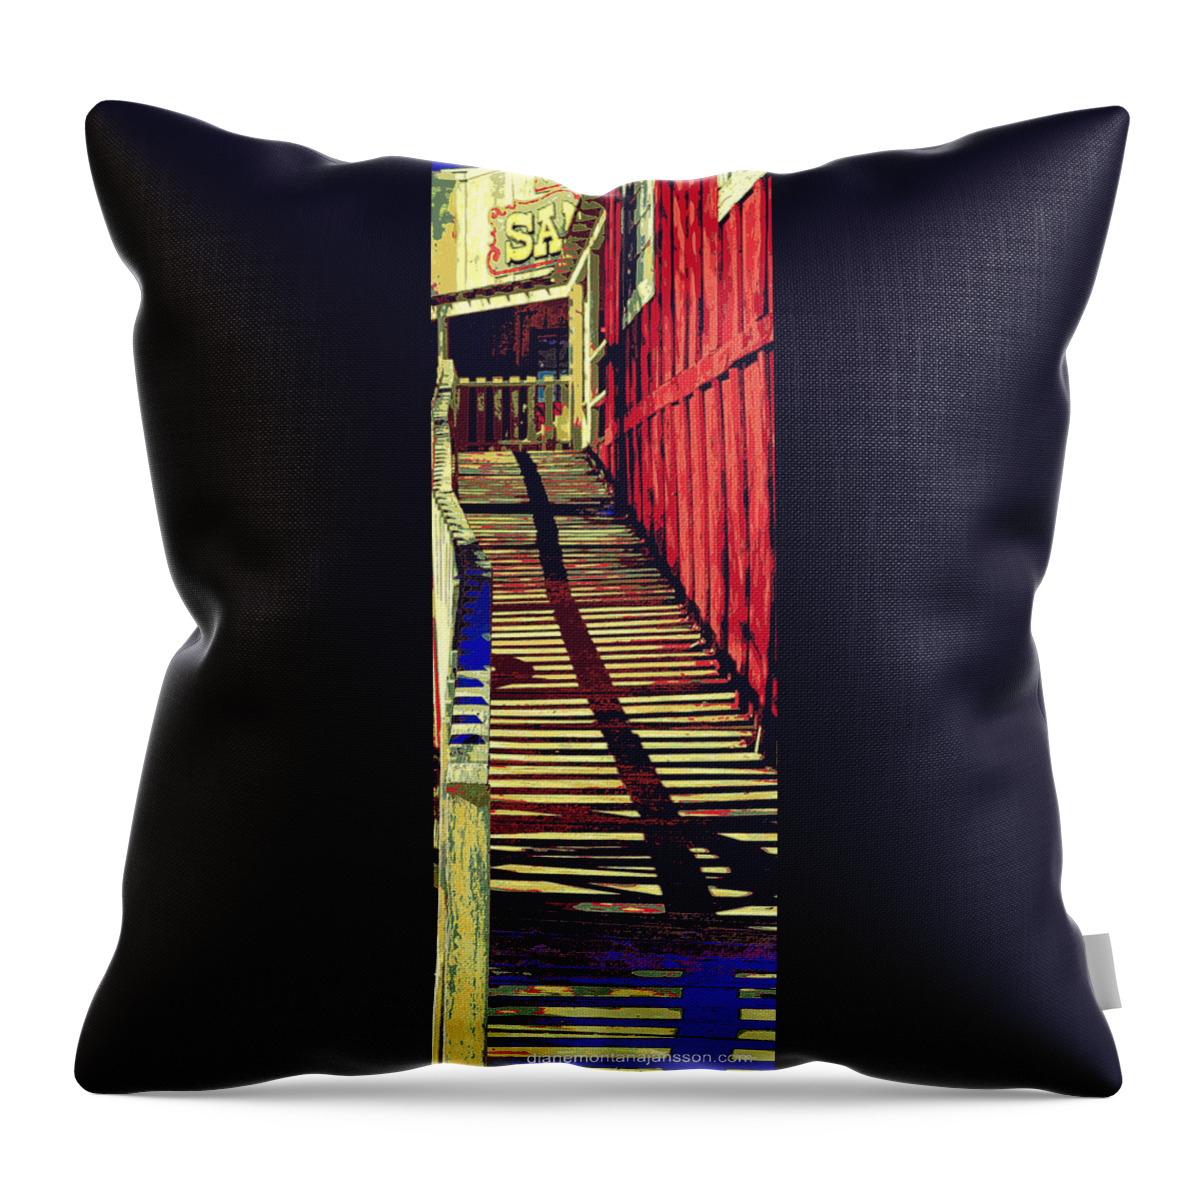 Boardwalk Throw Pillow featuring the photograph Walk This Way by Diane montana Jansson